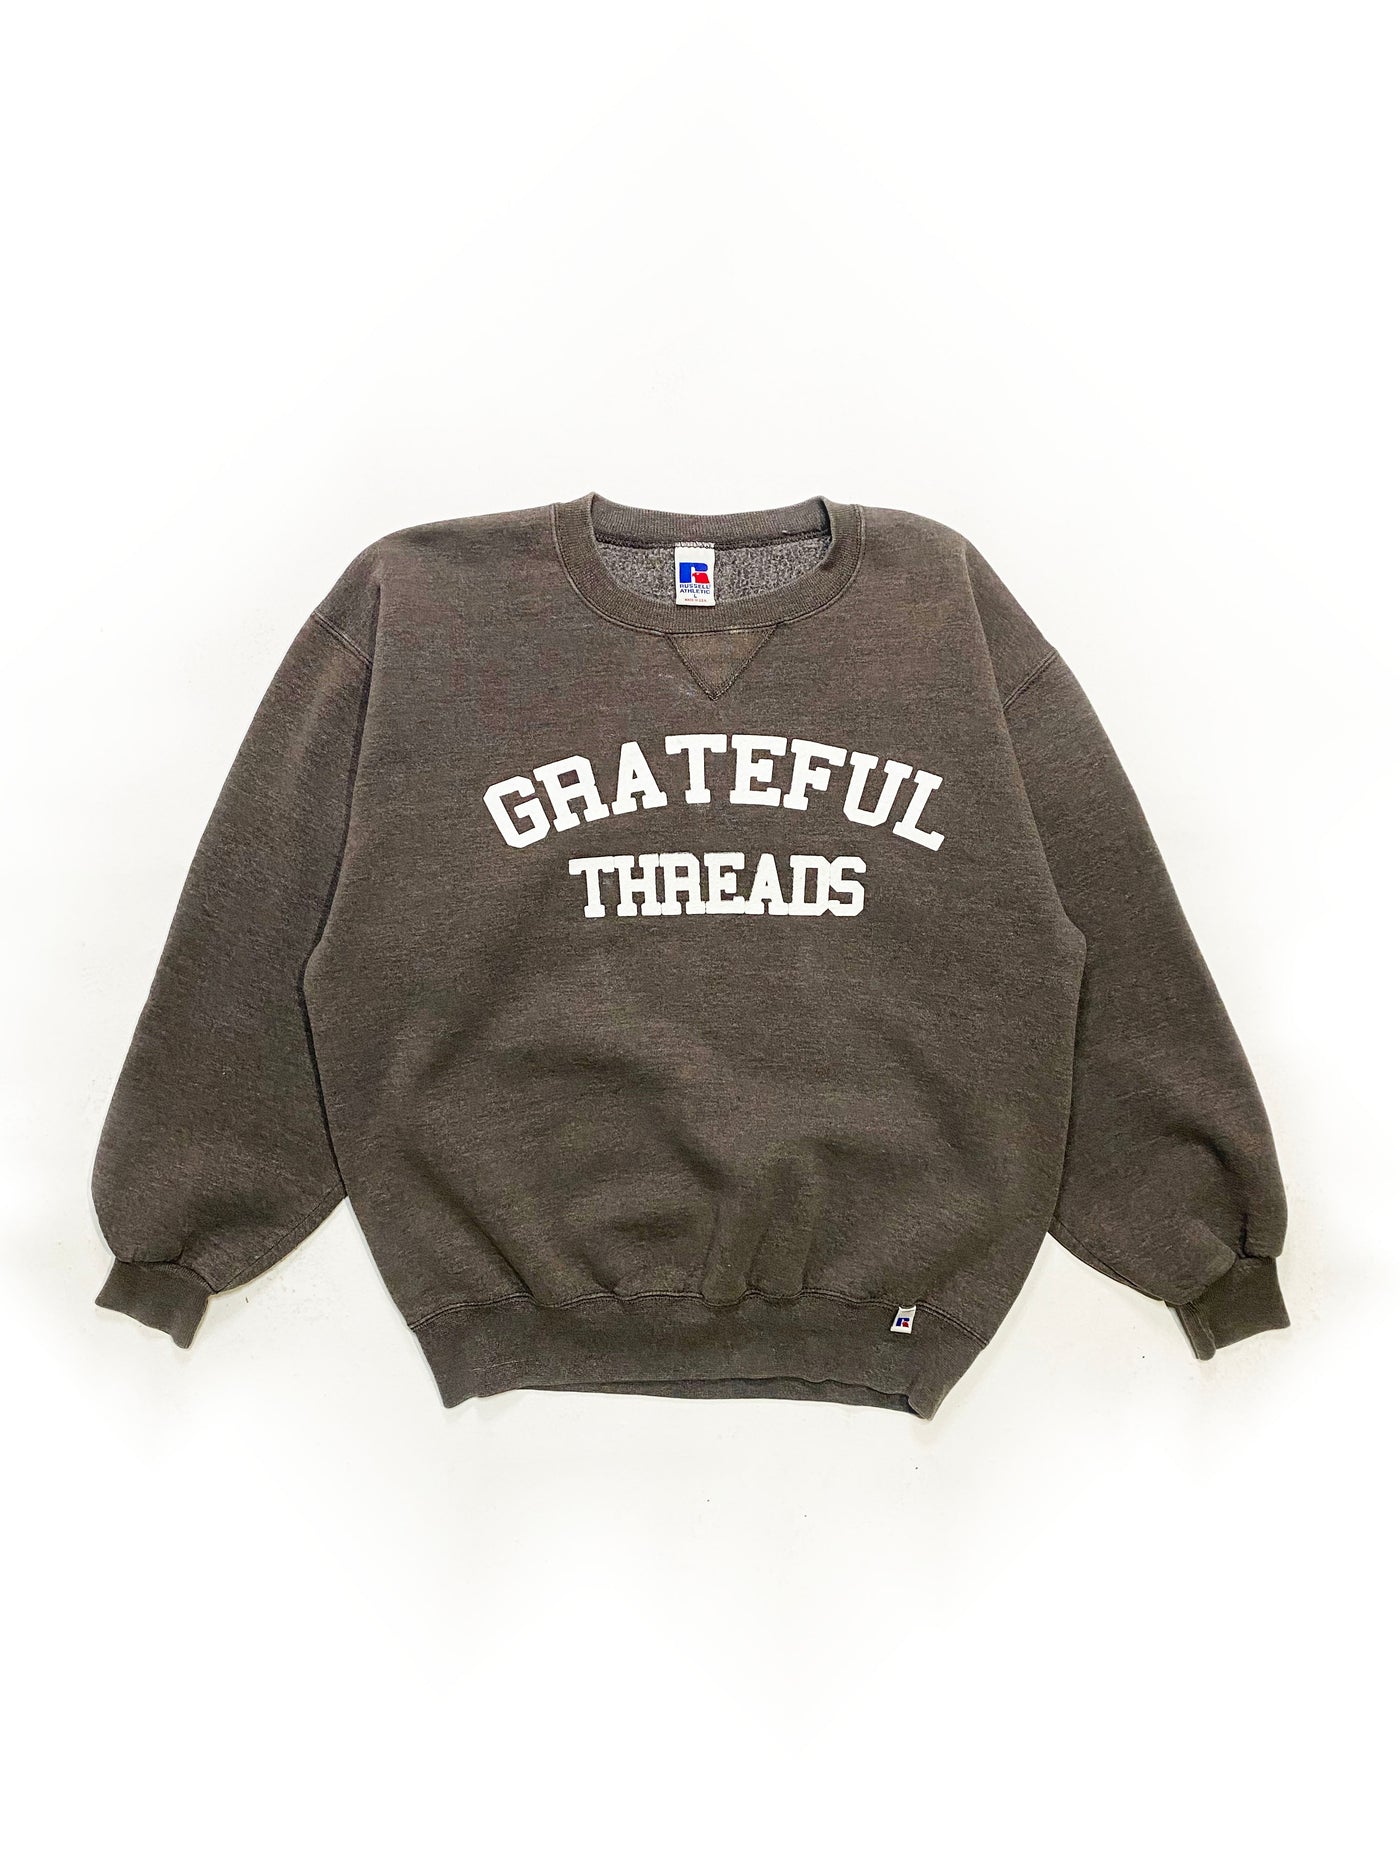 90s Russell Grateful Threads Spellout Crewneck - Faded Brown - Size L